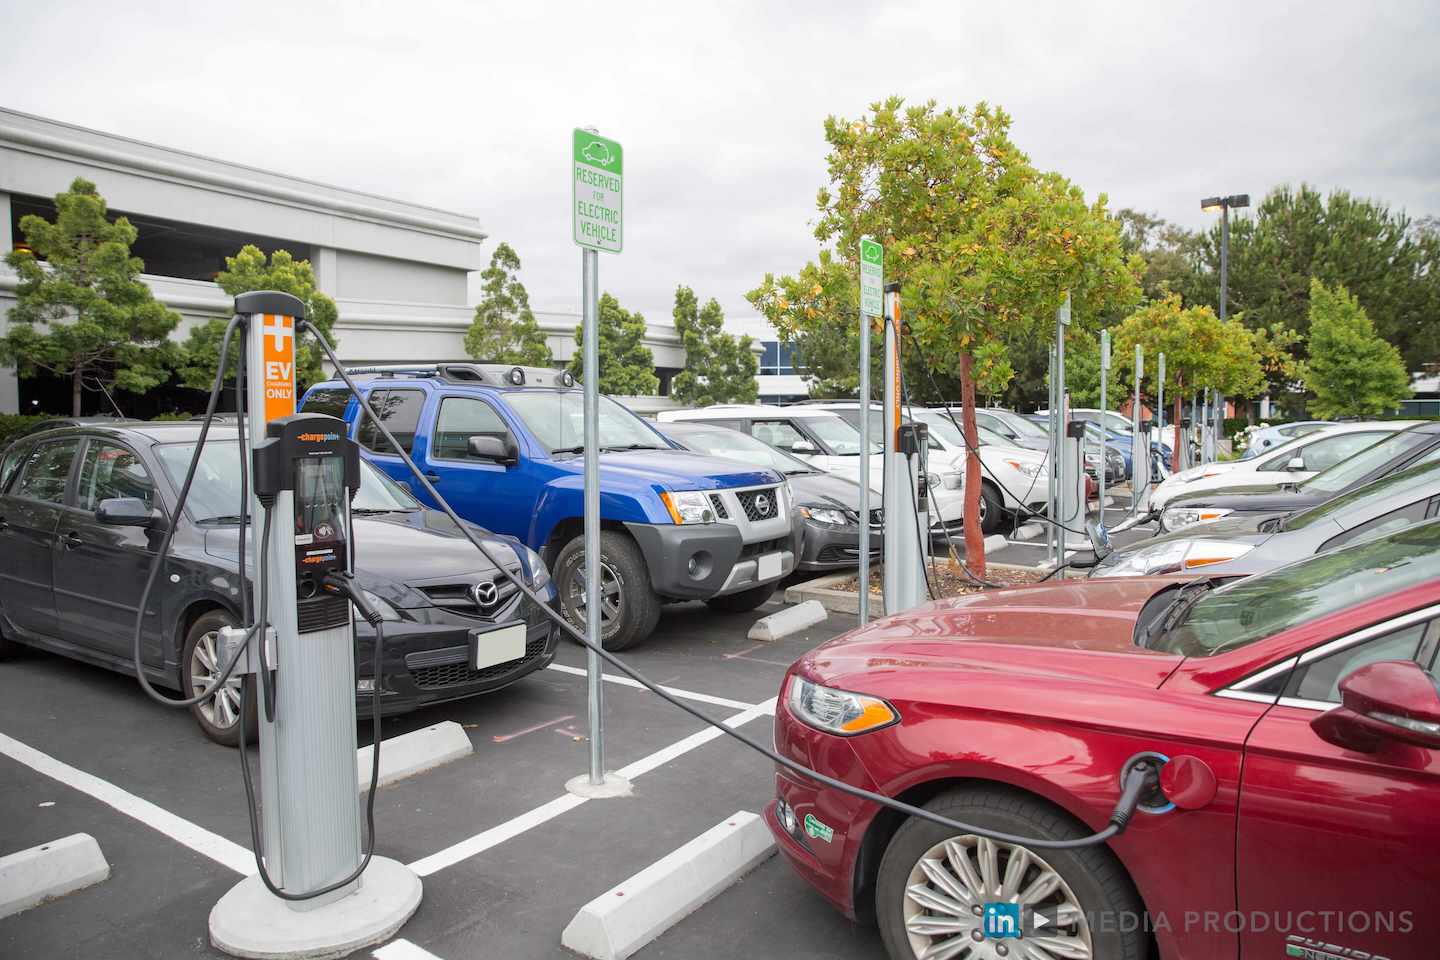 LinkedIn pioneers the future of work with ChargePoint EV charging